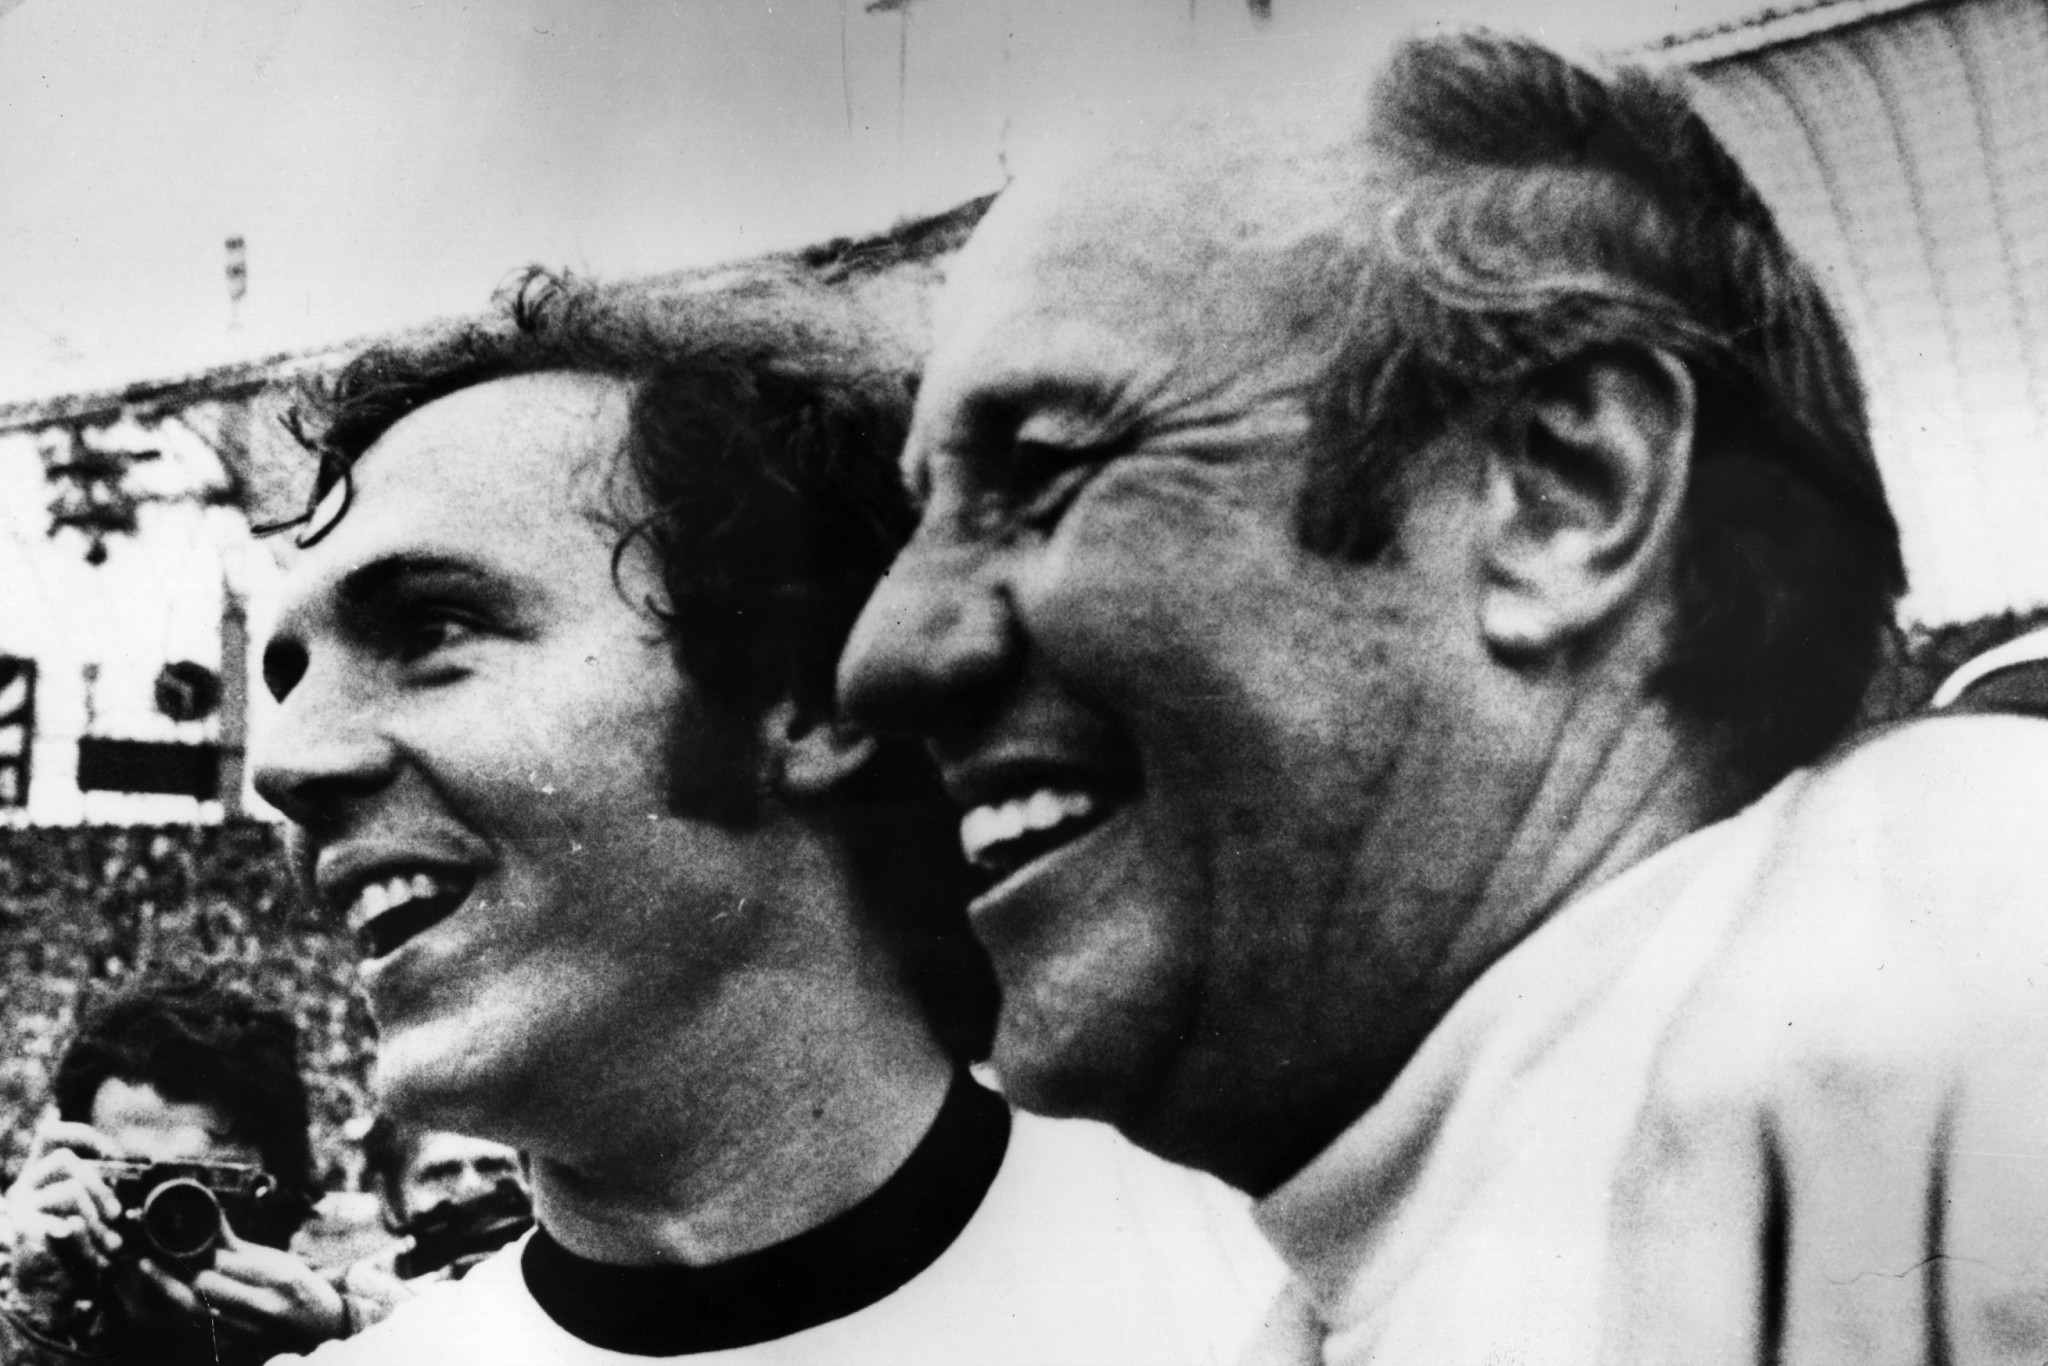 Helmut Schoen, right, seen with Franz Beckenbauer after West Germany had won the 1974 FIFA World Cup ©Getty Images